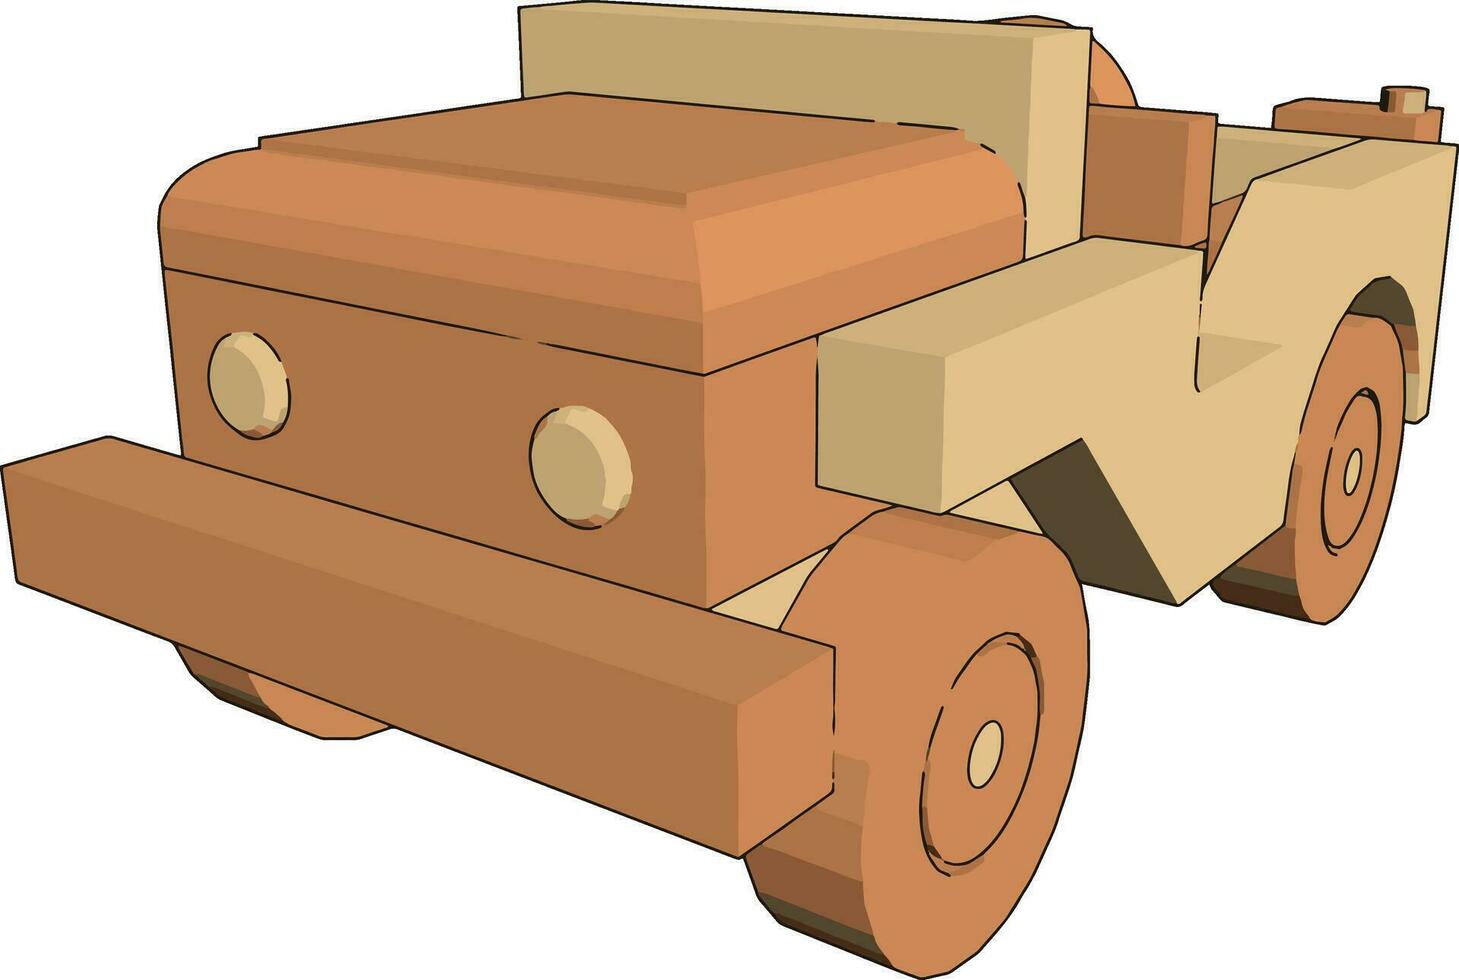 Jeep toy, illustration, vector on white background.